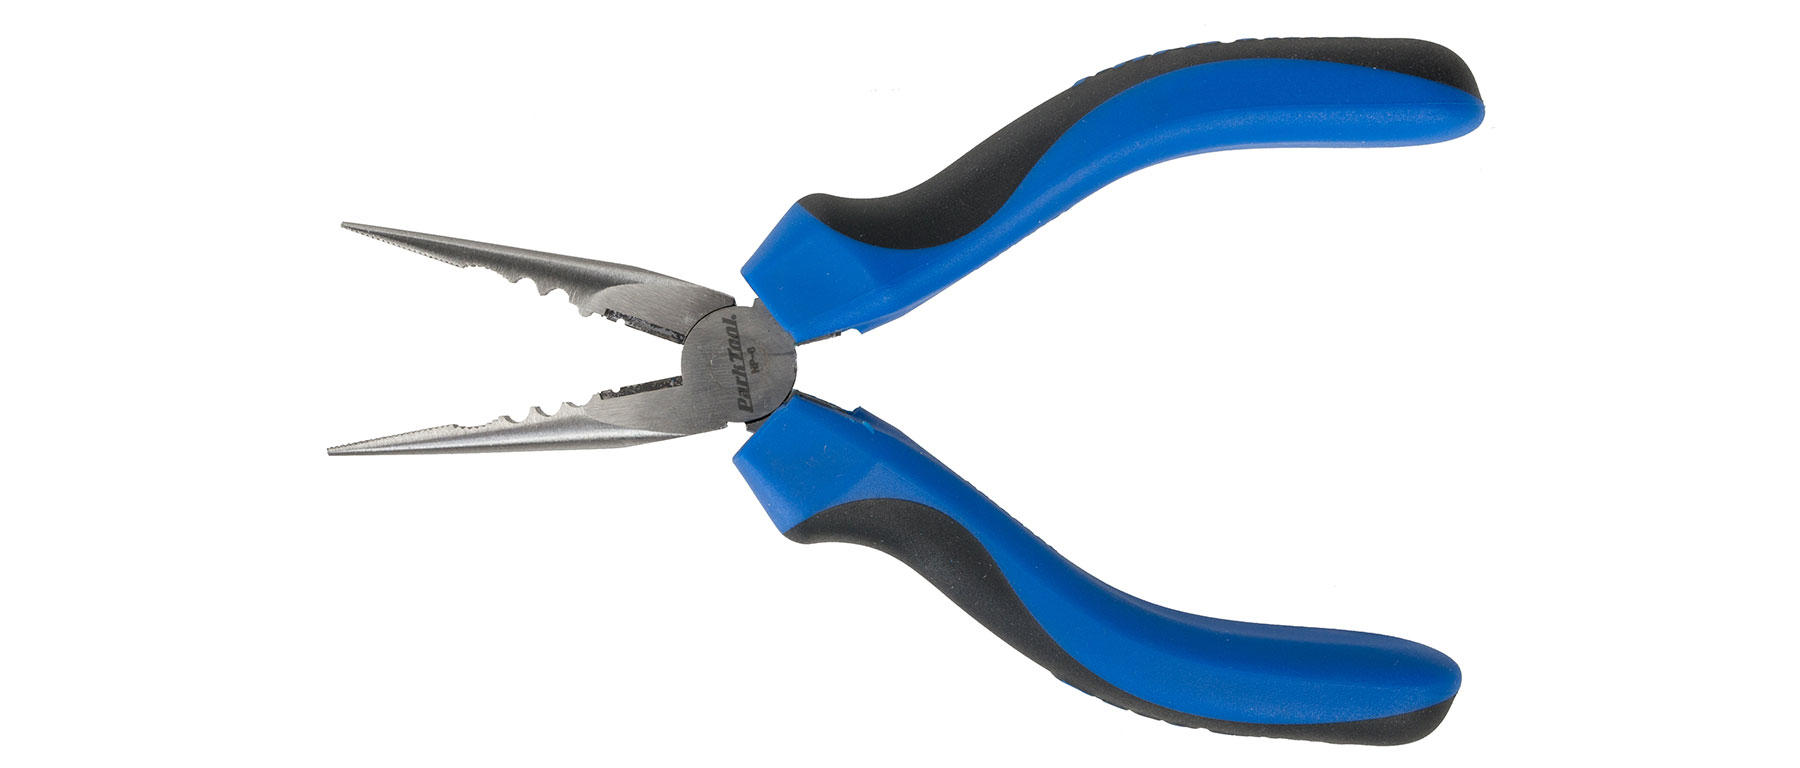 Park Tool NP-6 Professional Bike Shop Heat Treated Crimping Needle Nose Pliers 